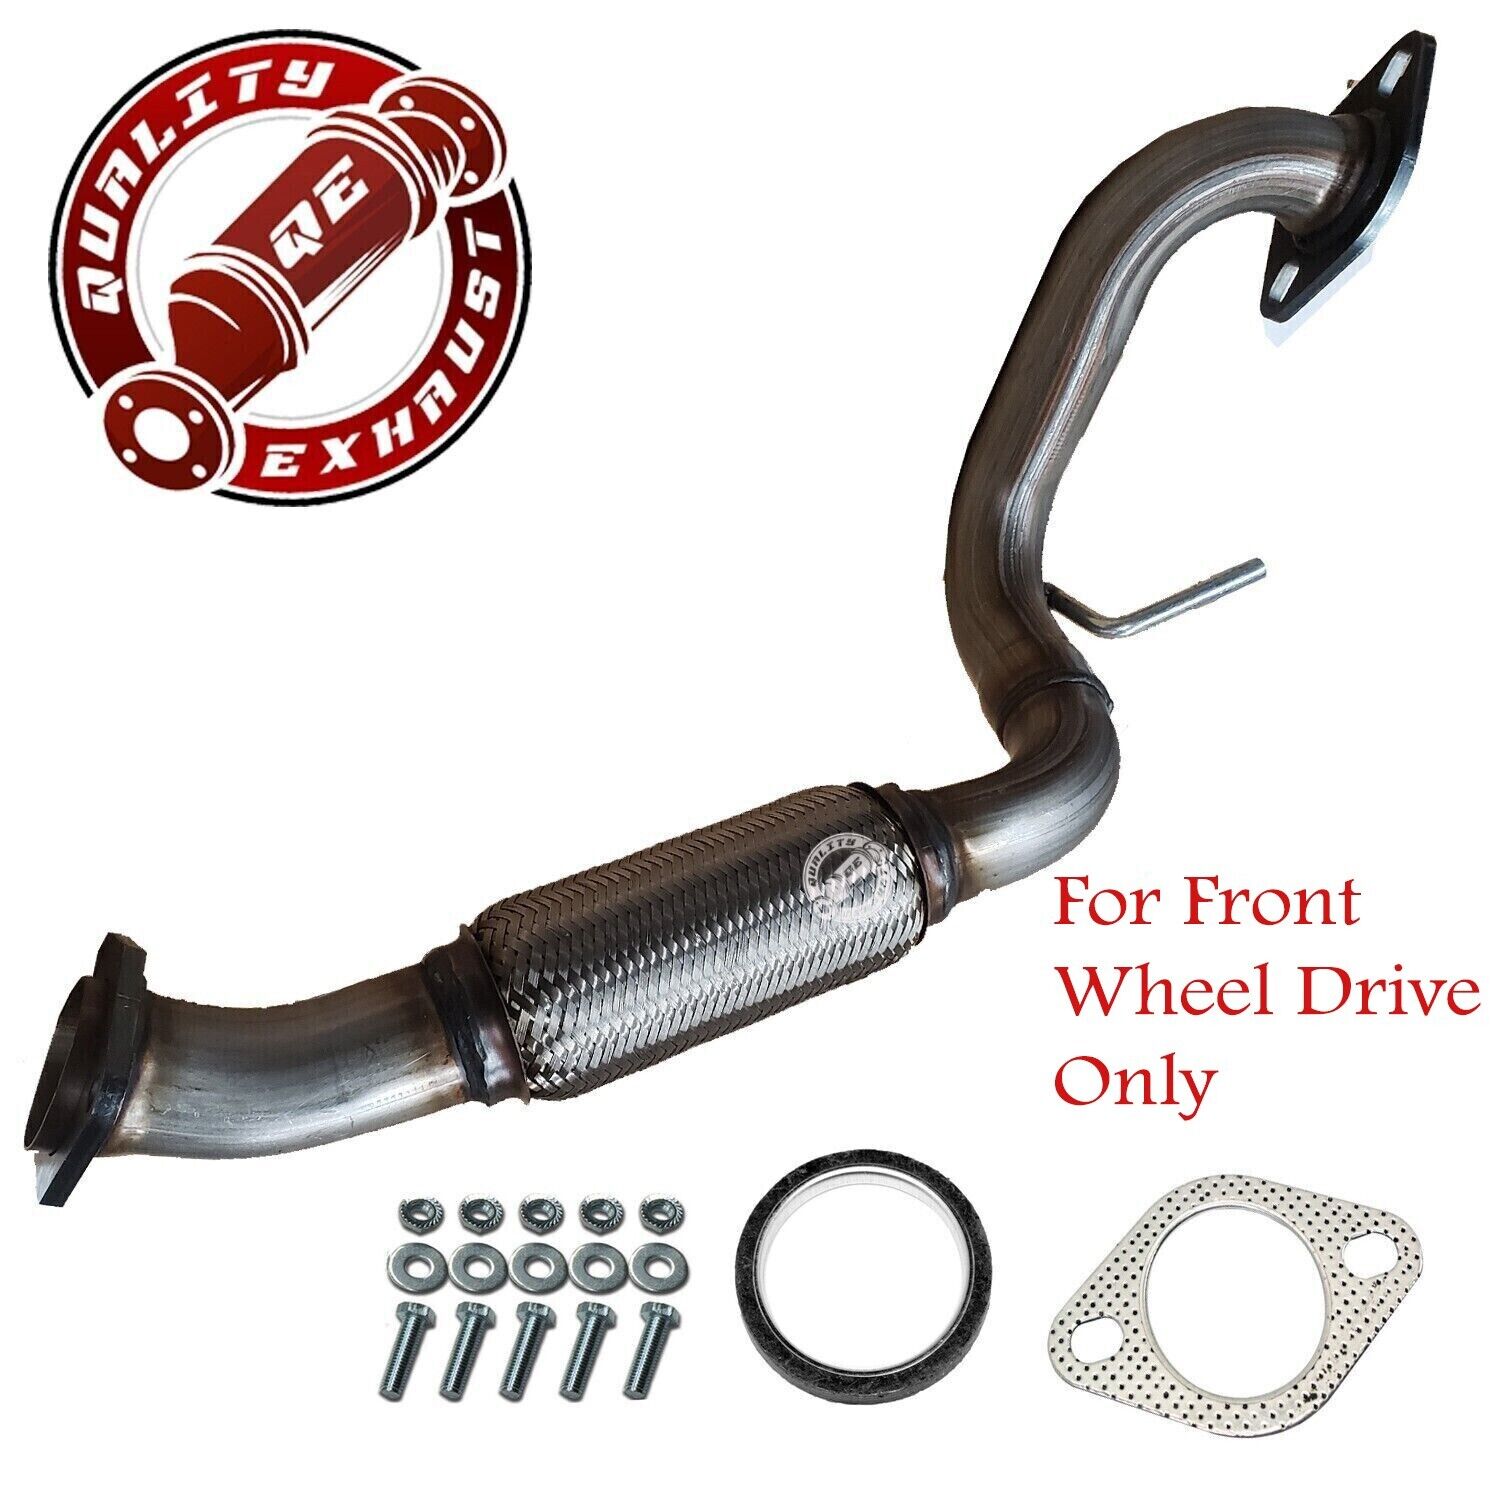 Exhaust Flex Pipe Fits 2008-2014 Nissan Rogue 2.5L / Front wheel drive